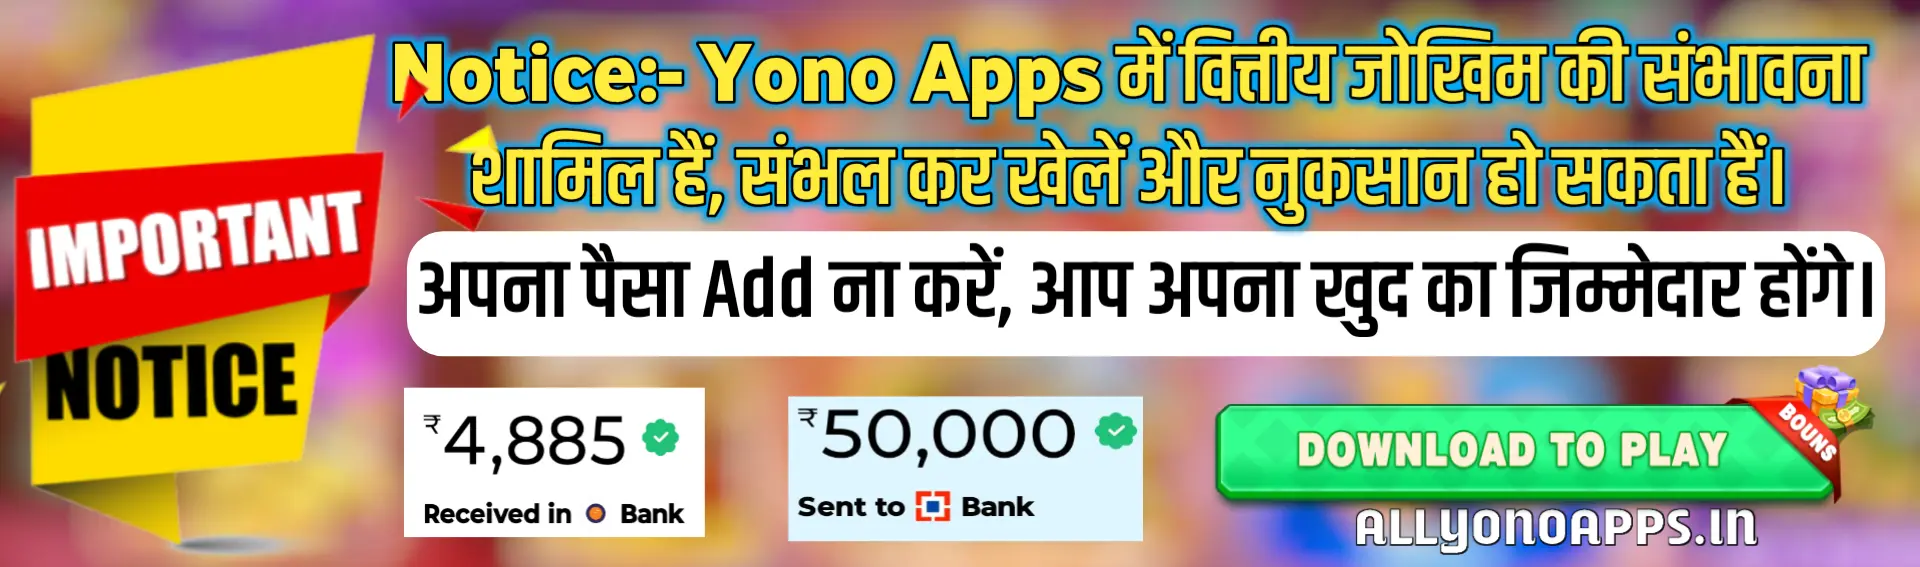 All Yono Apps Banner